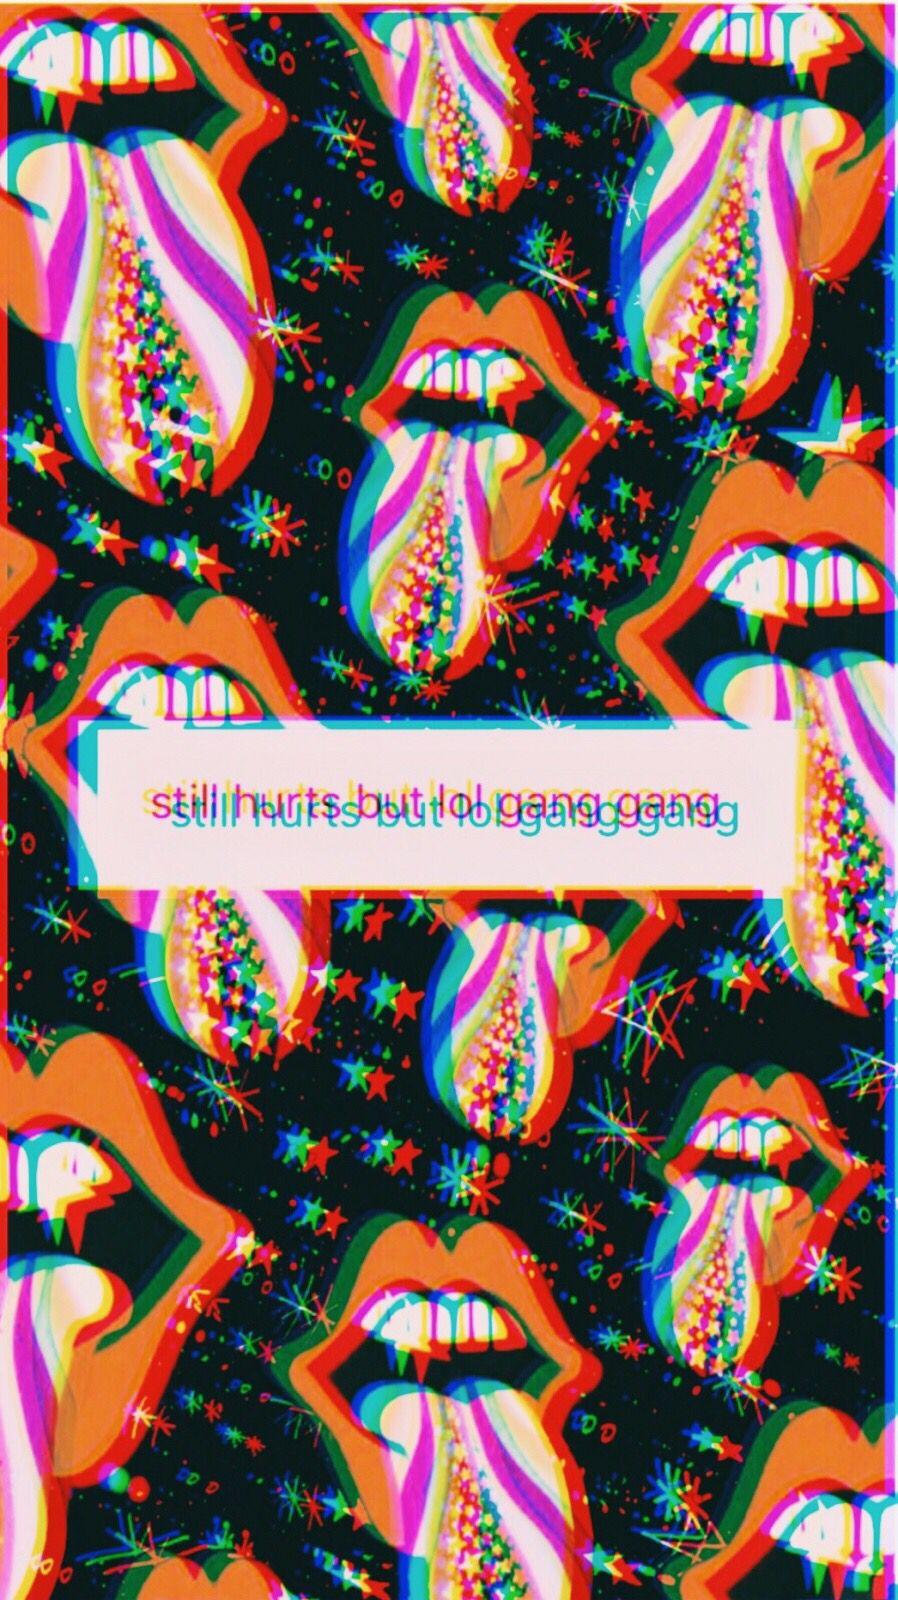 Still hurts but lol gang gang wallpapers with weird tongues in 2020